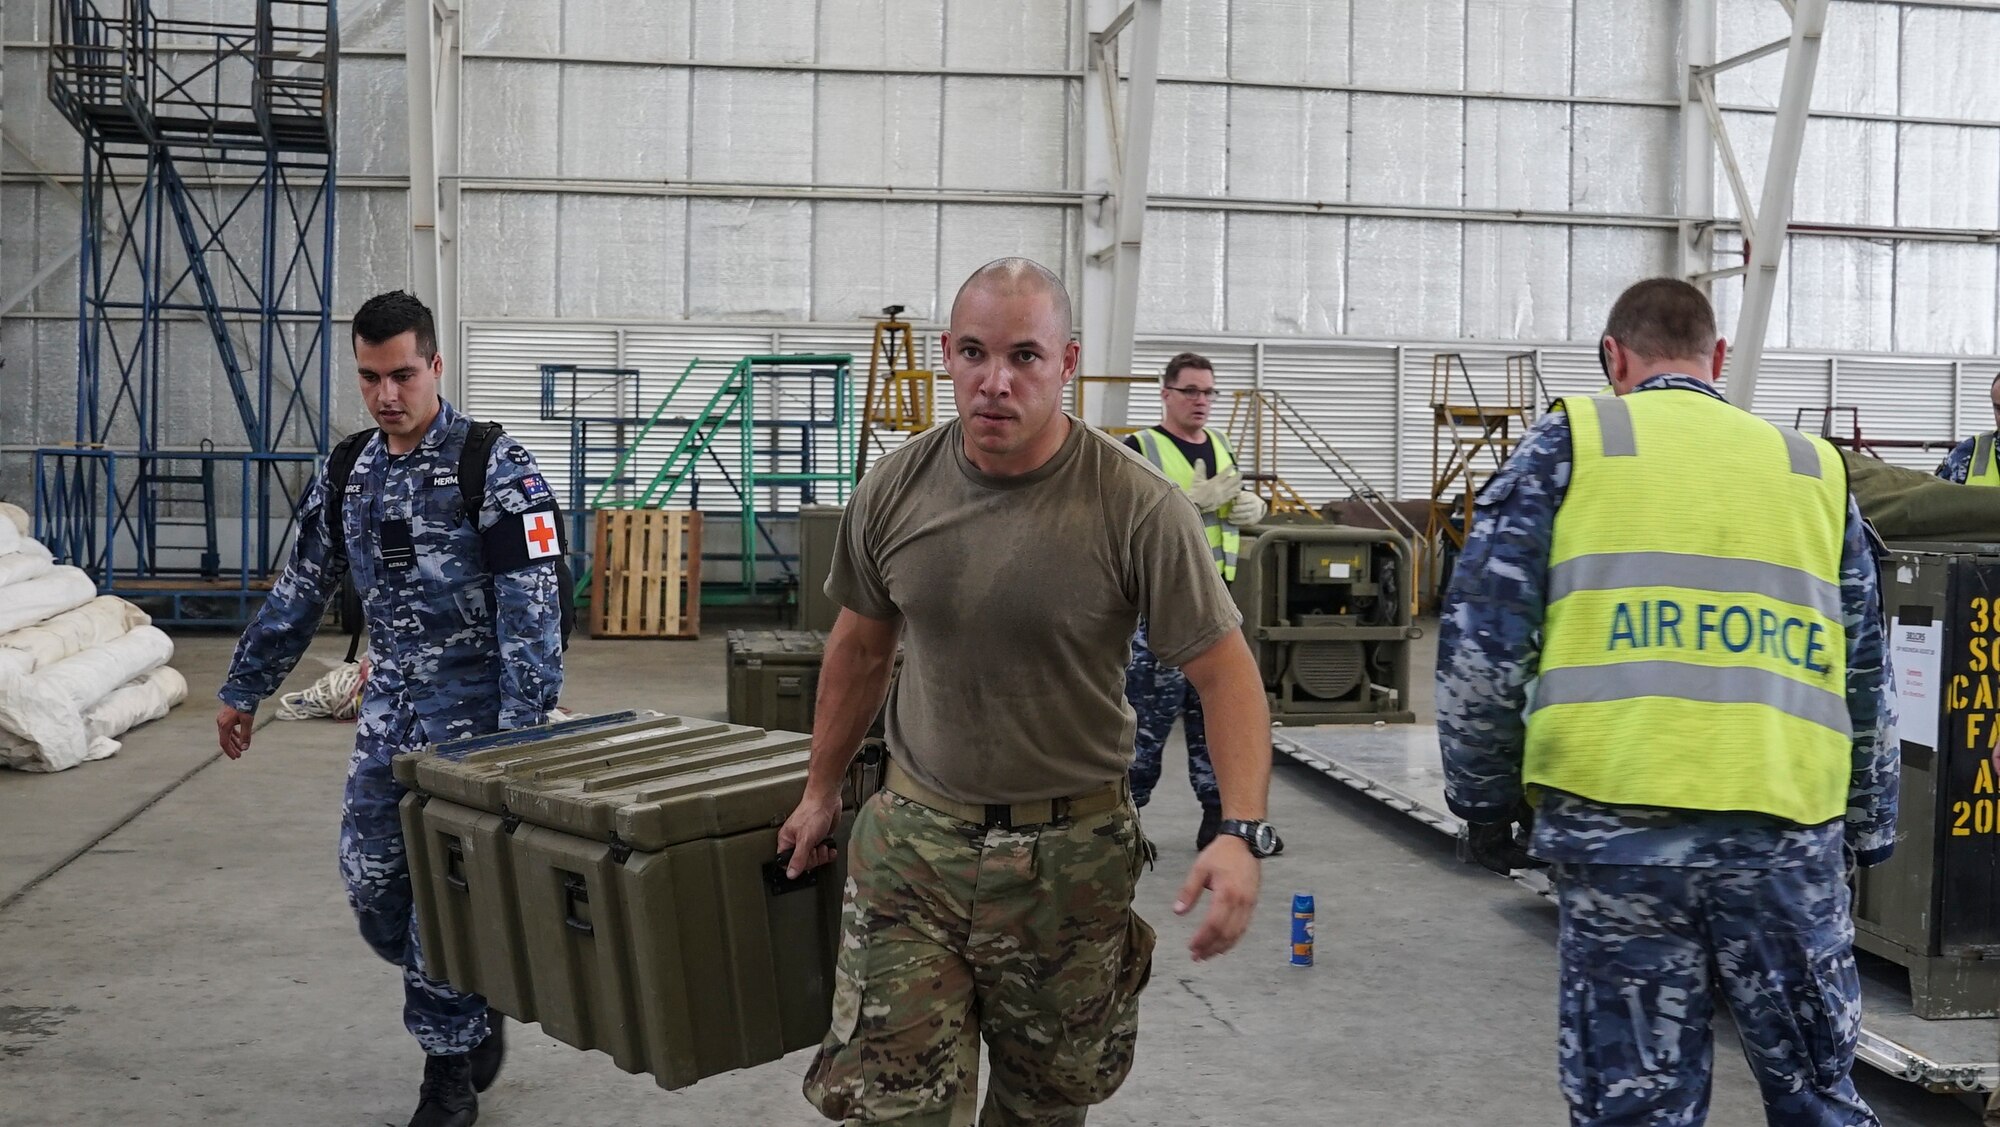 U.S. Air Force Tech Sgt. Eliezer Ribeiro, 36th Contingency Response Group vehicle maintenance NCO in charge at Andersen Air Force Base, helps Royal Australian Air Force medical personnel offload supplies in Balikpapan, Indonesia. The Indonesian Government and U.S. Agency for International Development are working alongside eight countries agencies and foreign militaries ensuring supplies, airlift, shelter and medical support reach those affected. (U.S. Air Force photo by Master Sgt. JT May III)